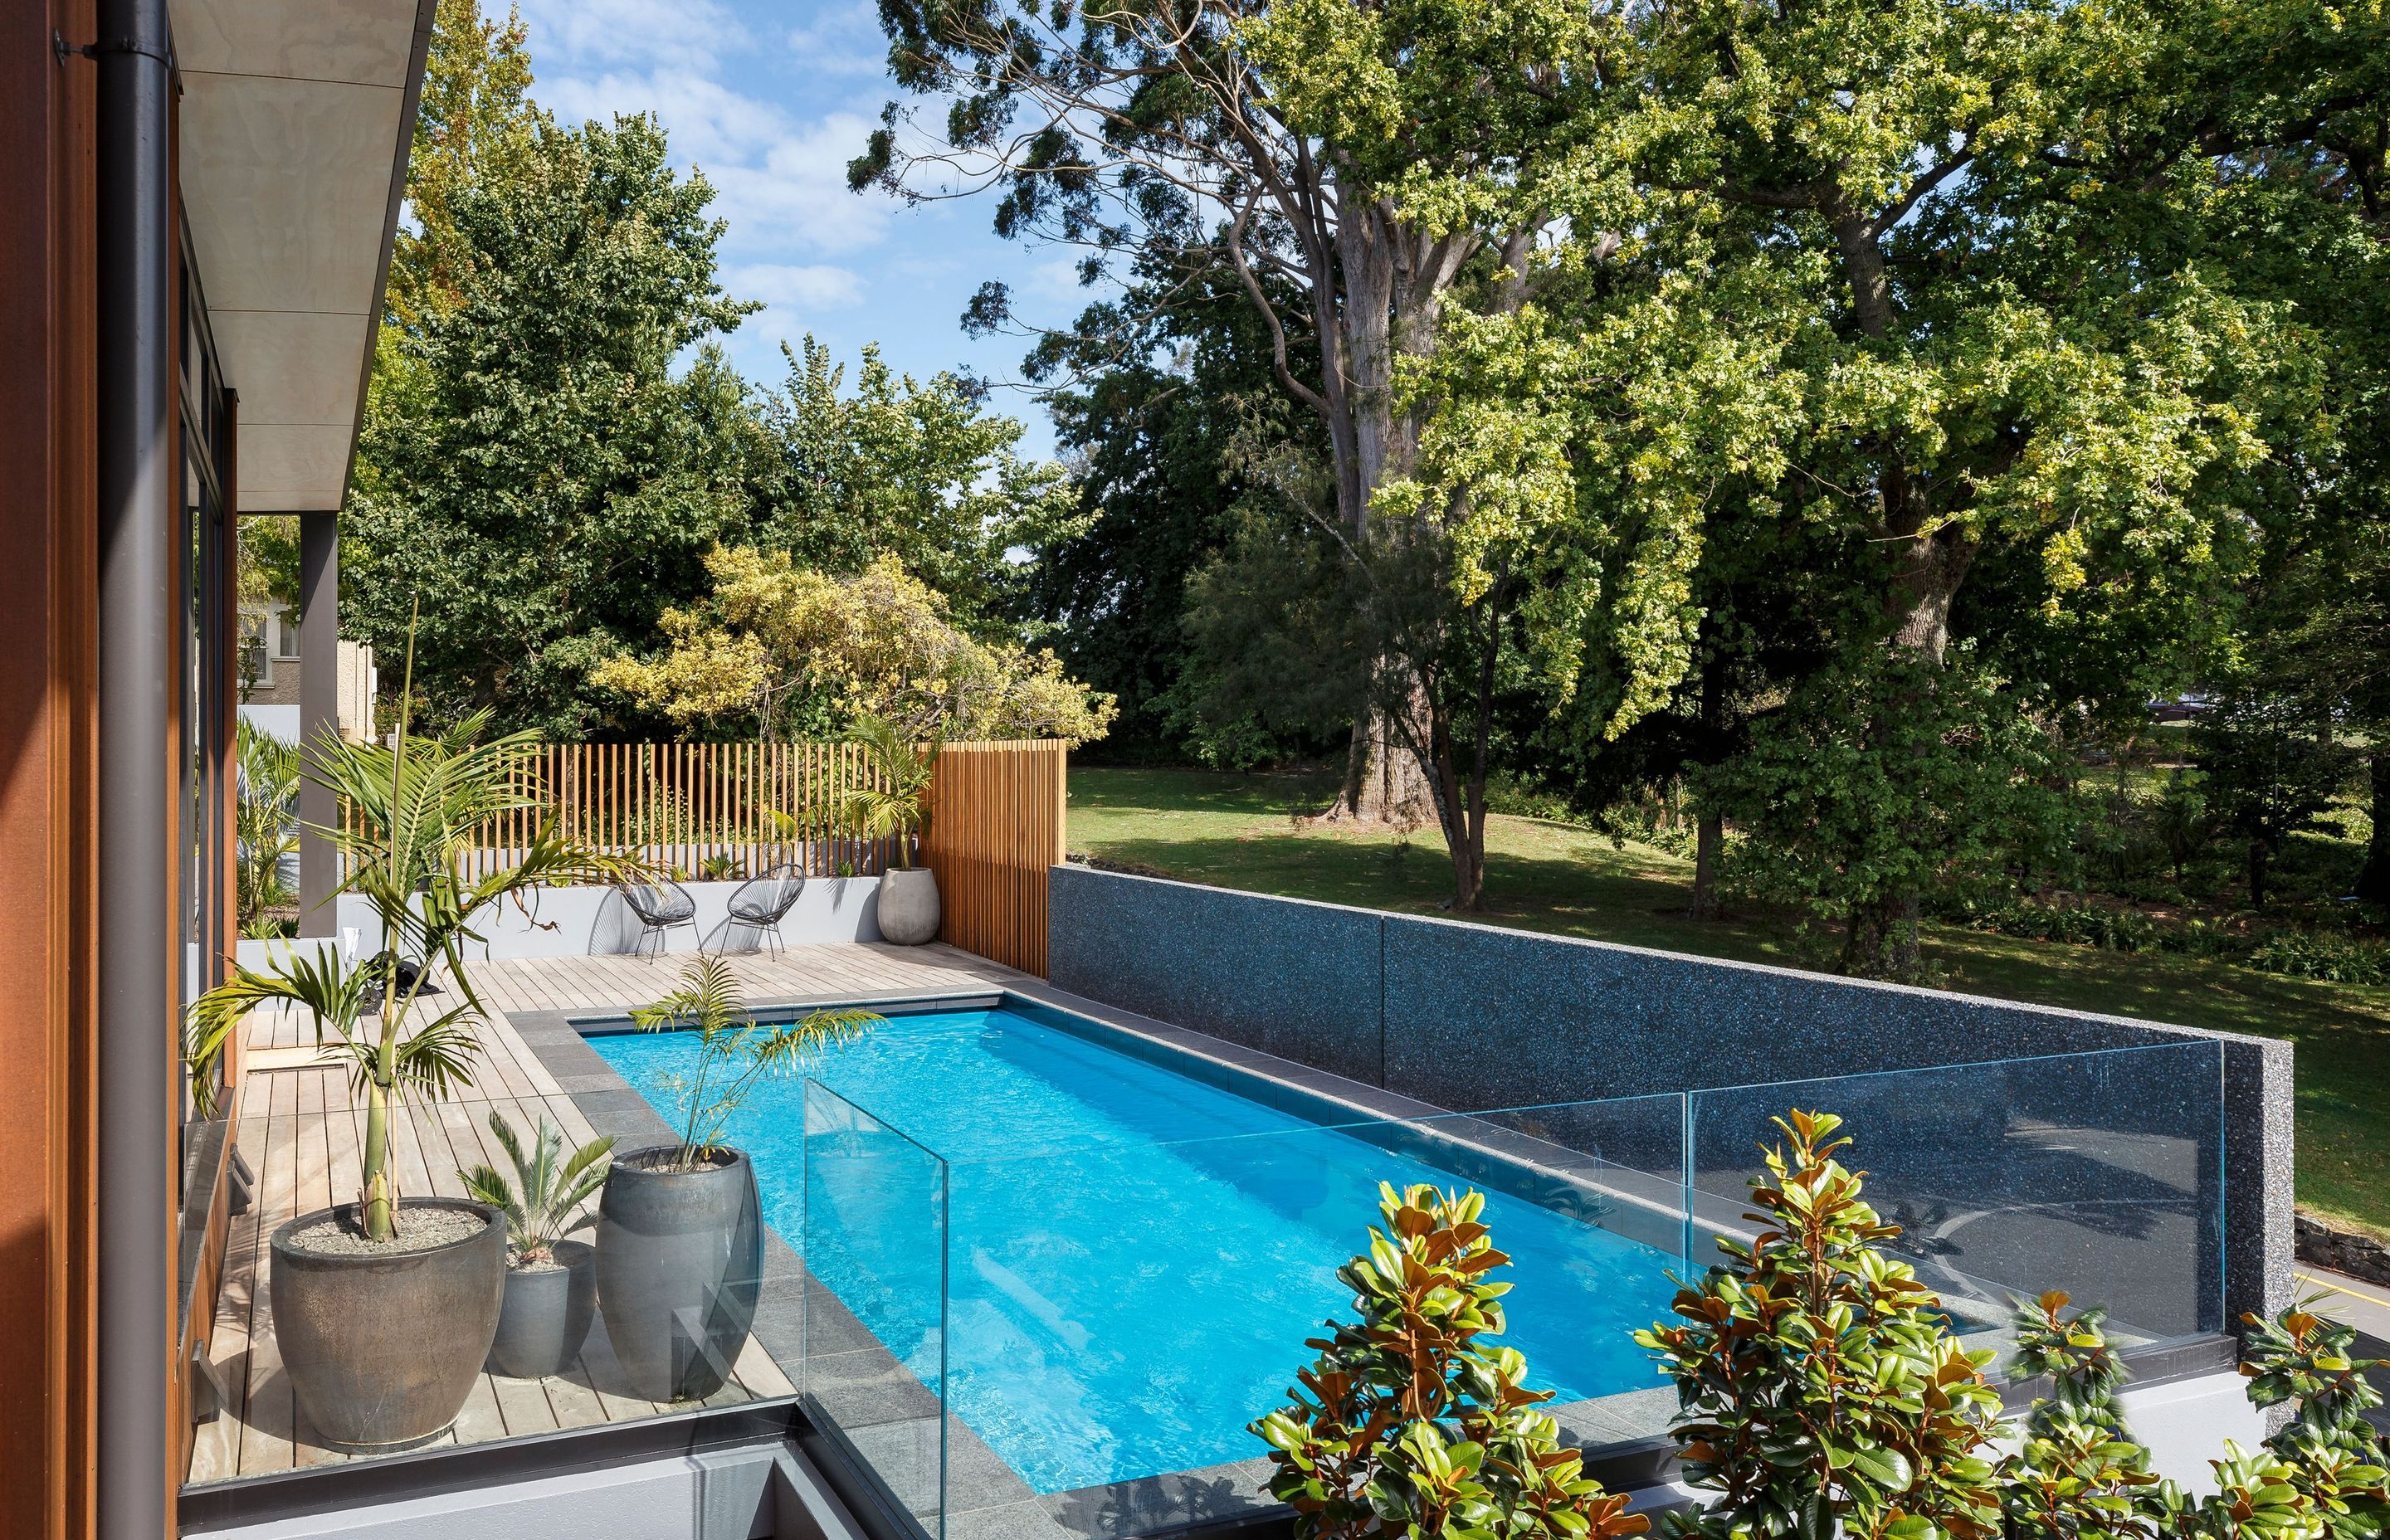 The swimming pool area enjoys shade provided by established trees in the adjacent garden.